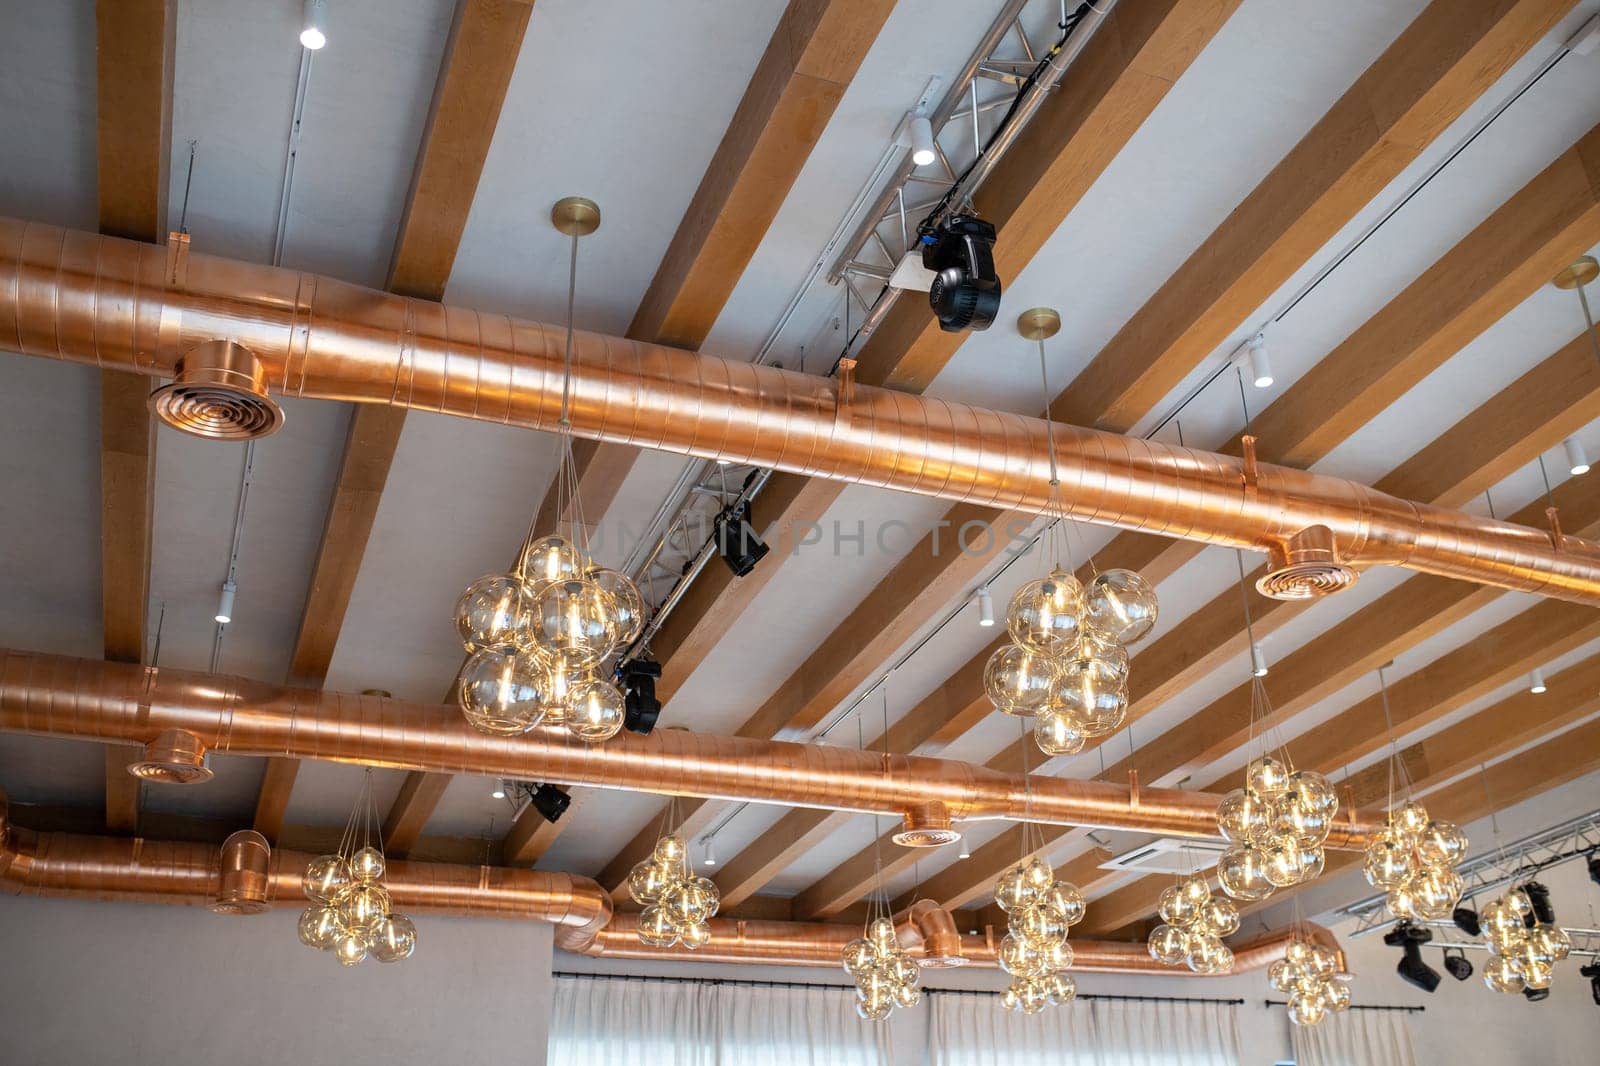 Ceiling in a modern loft style with wooden beams, ventilation, trusses and lighting.